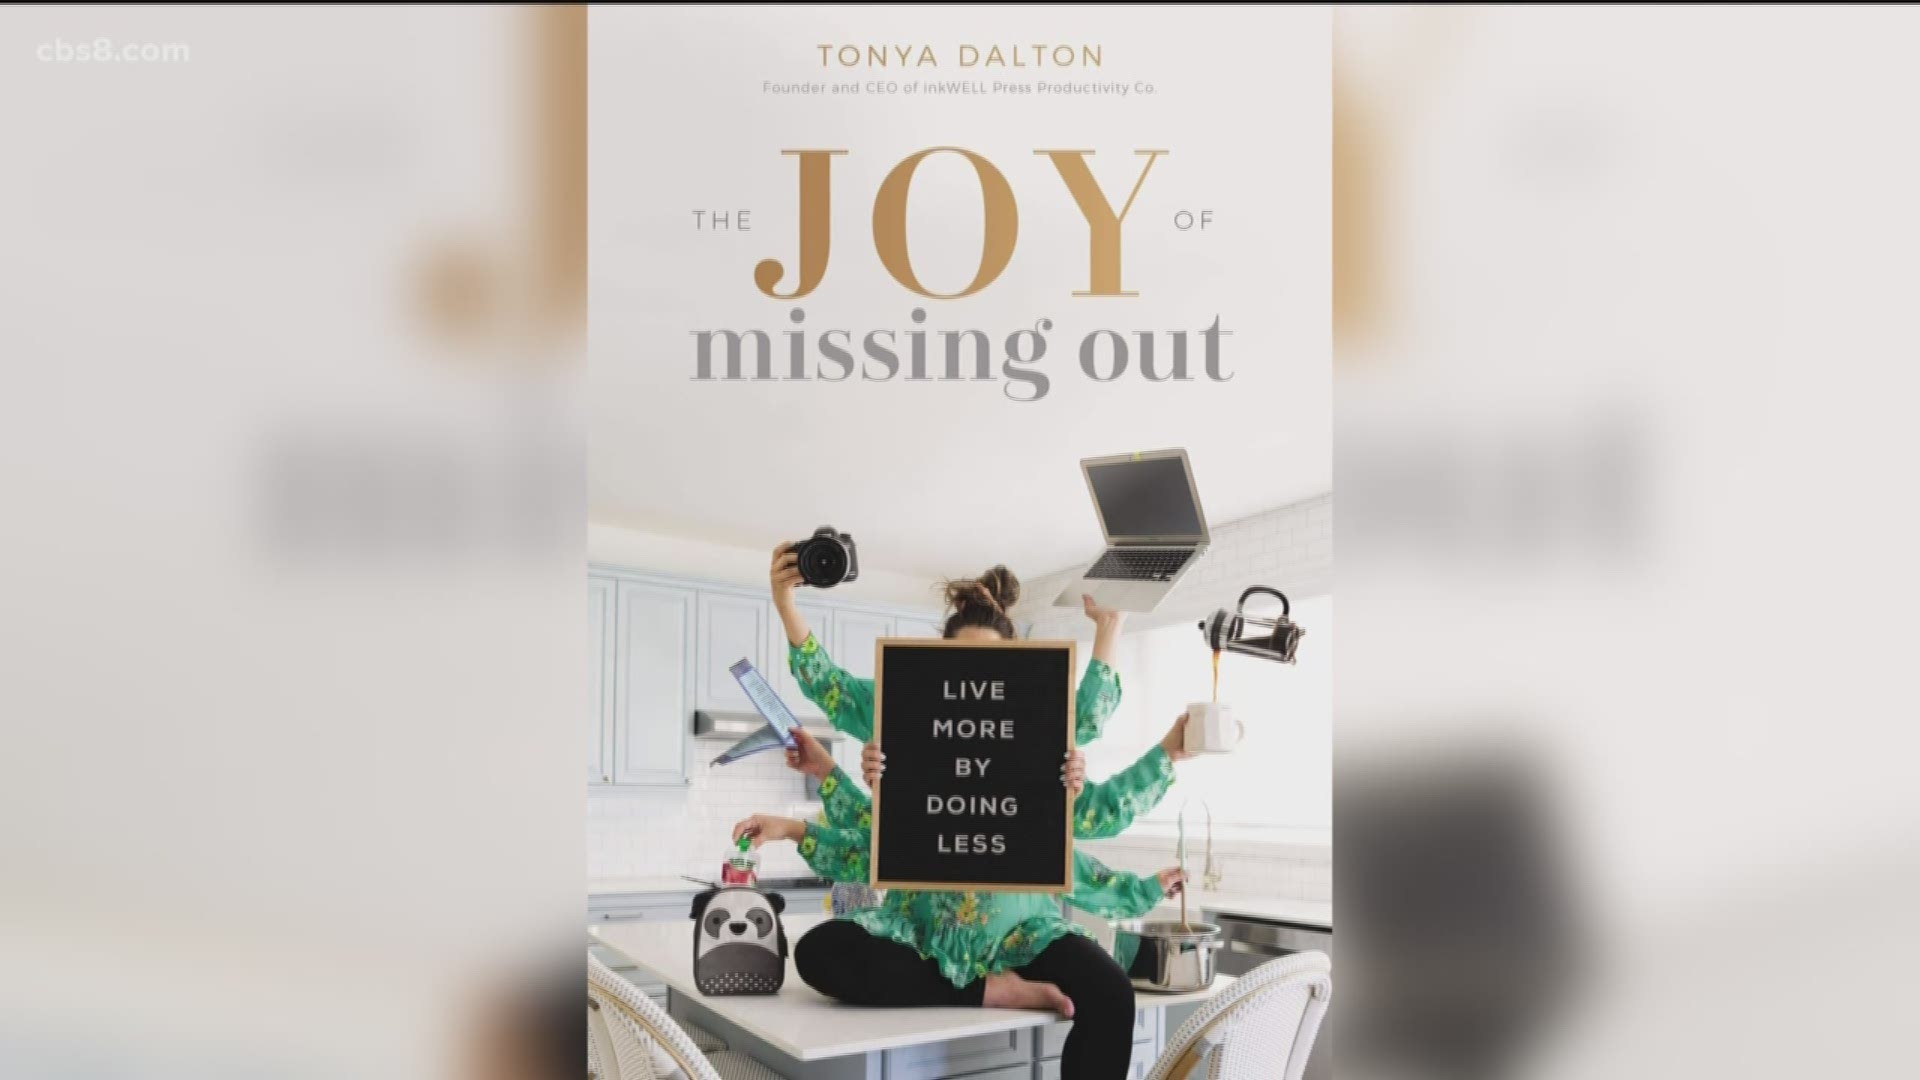 'The Joy of Missing Out' book was named to Fortune’s 'Ten Best Business Books of 2019'